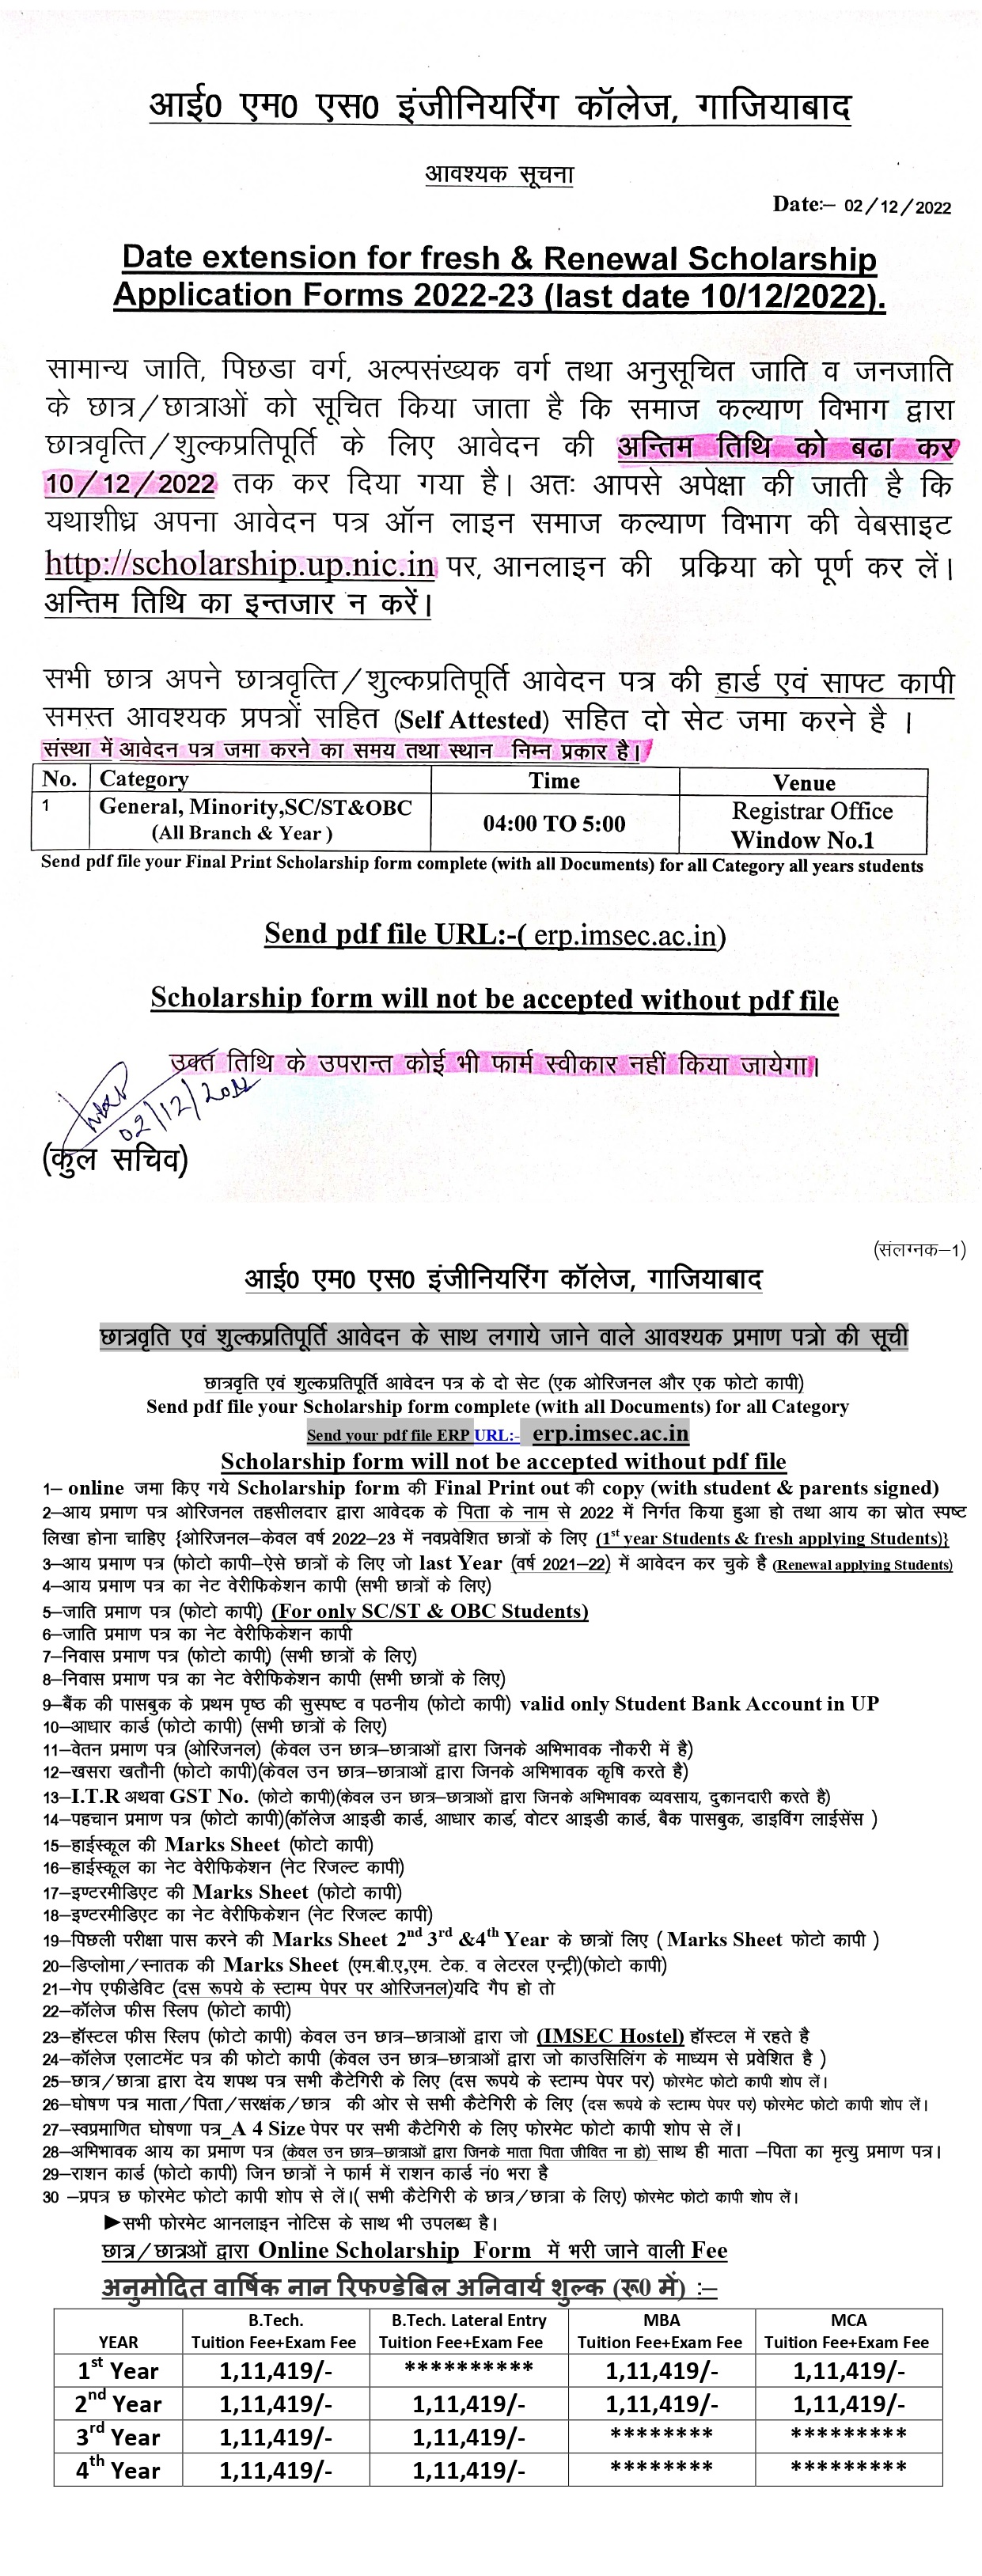 Extension of date for filling the UP Govt. Scholarship Form 2022-23-last date 10-12-2022